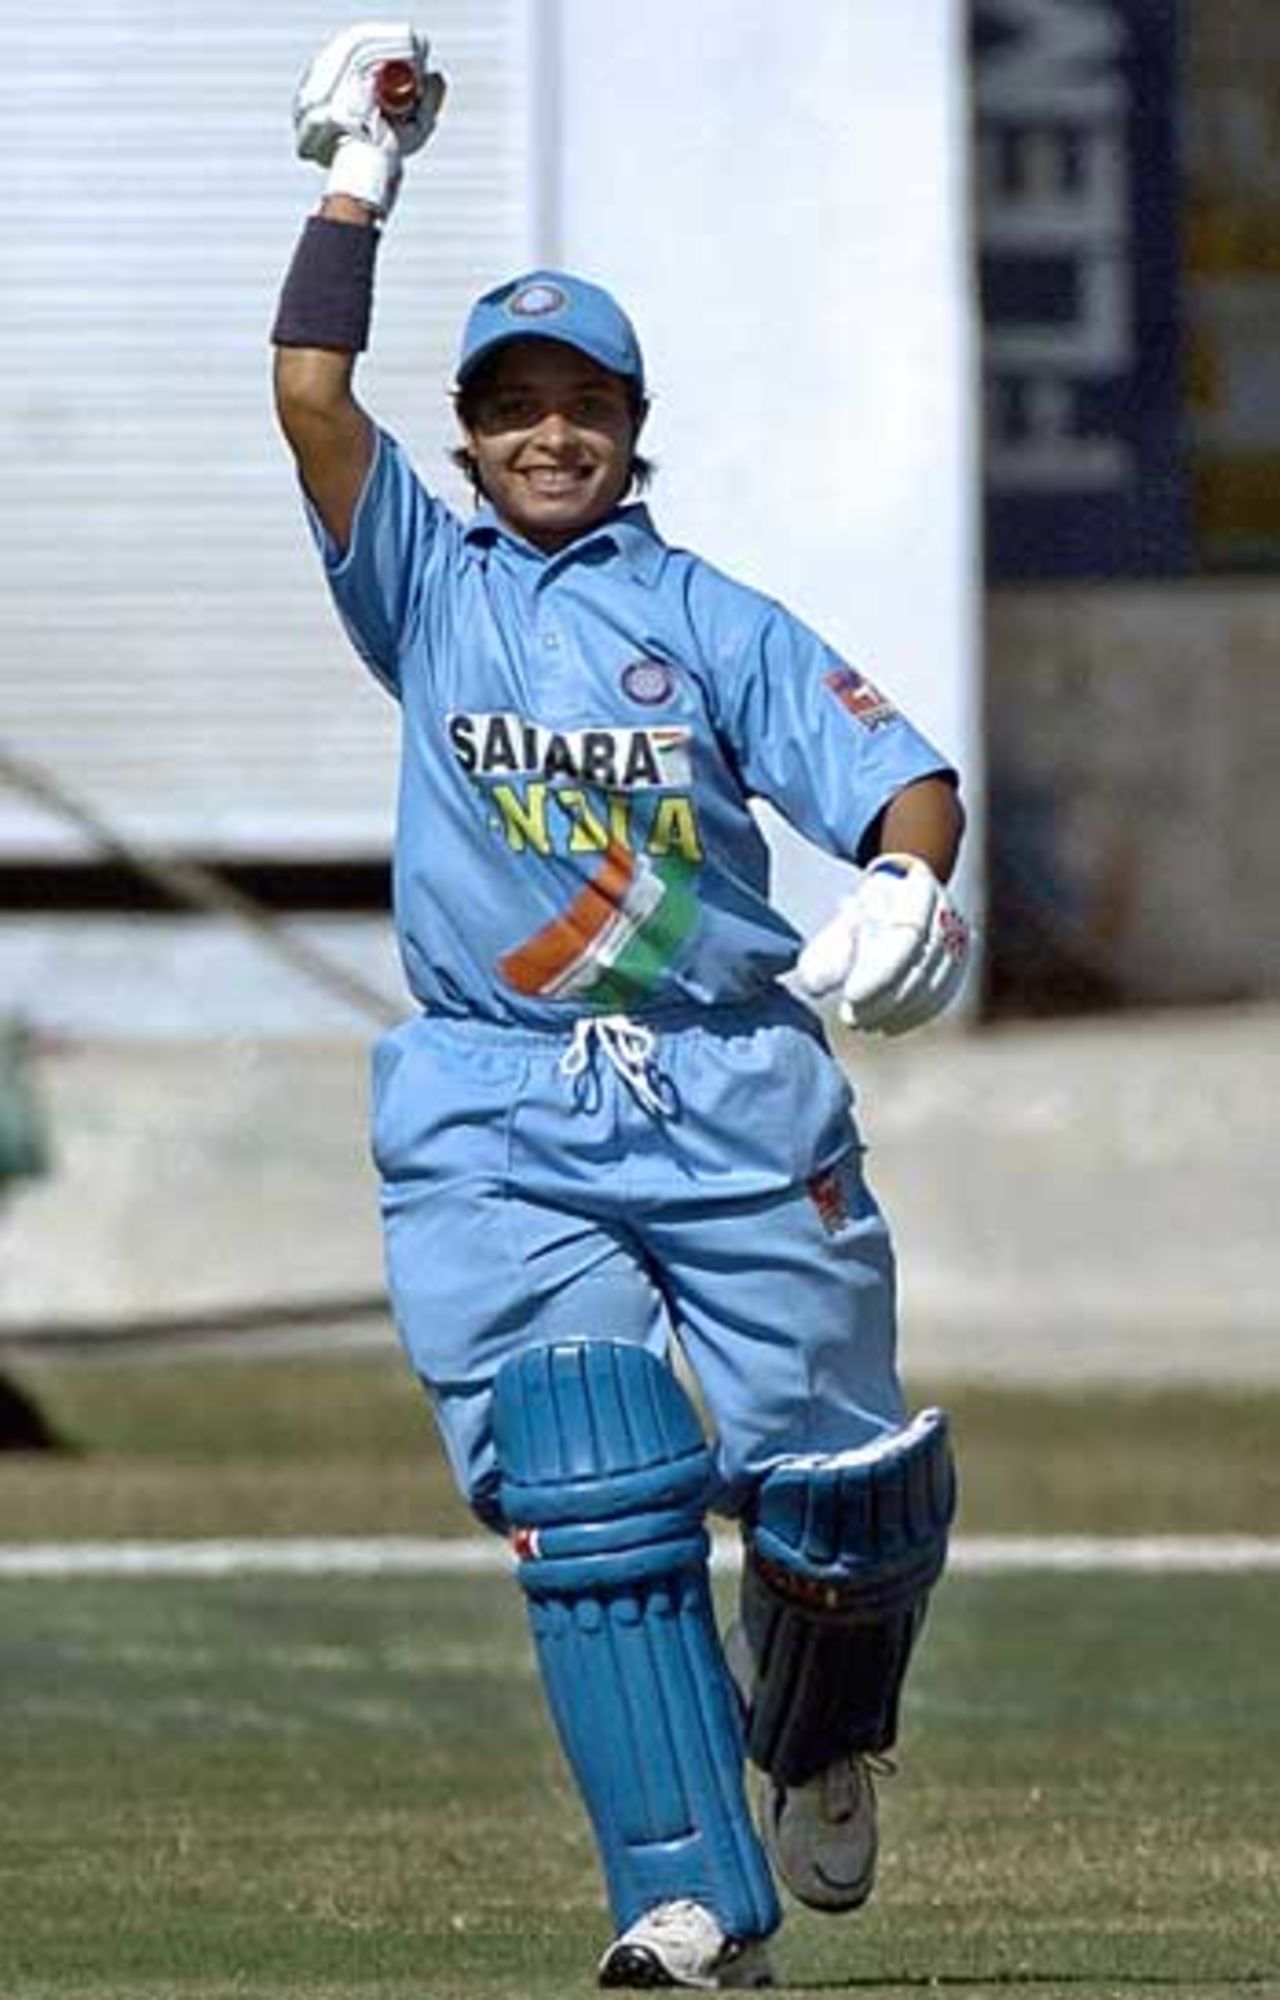 Jaya Sharma celebrates her century against Pakistan, which finished as the highest score for India's women in ODIs, Pakistan Women v India Women, 3rd Asia Cup match, Karachi, December 30, 2005